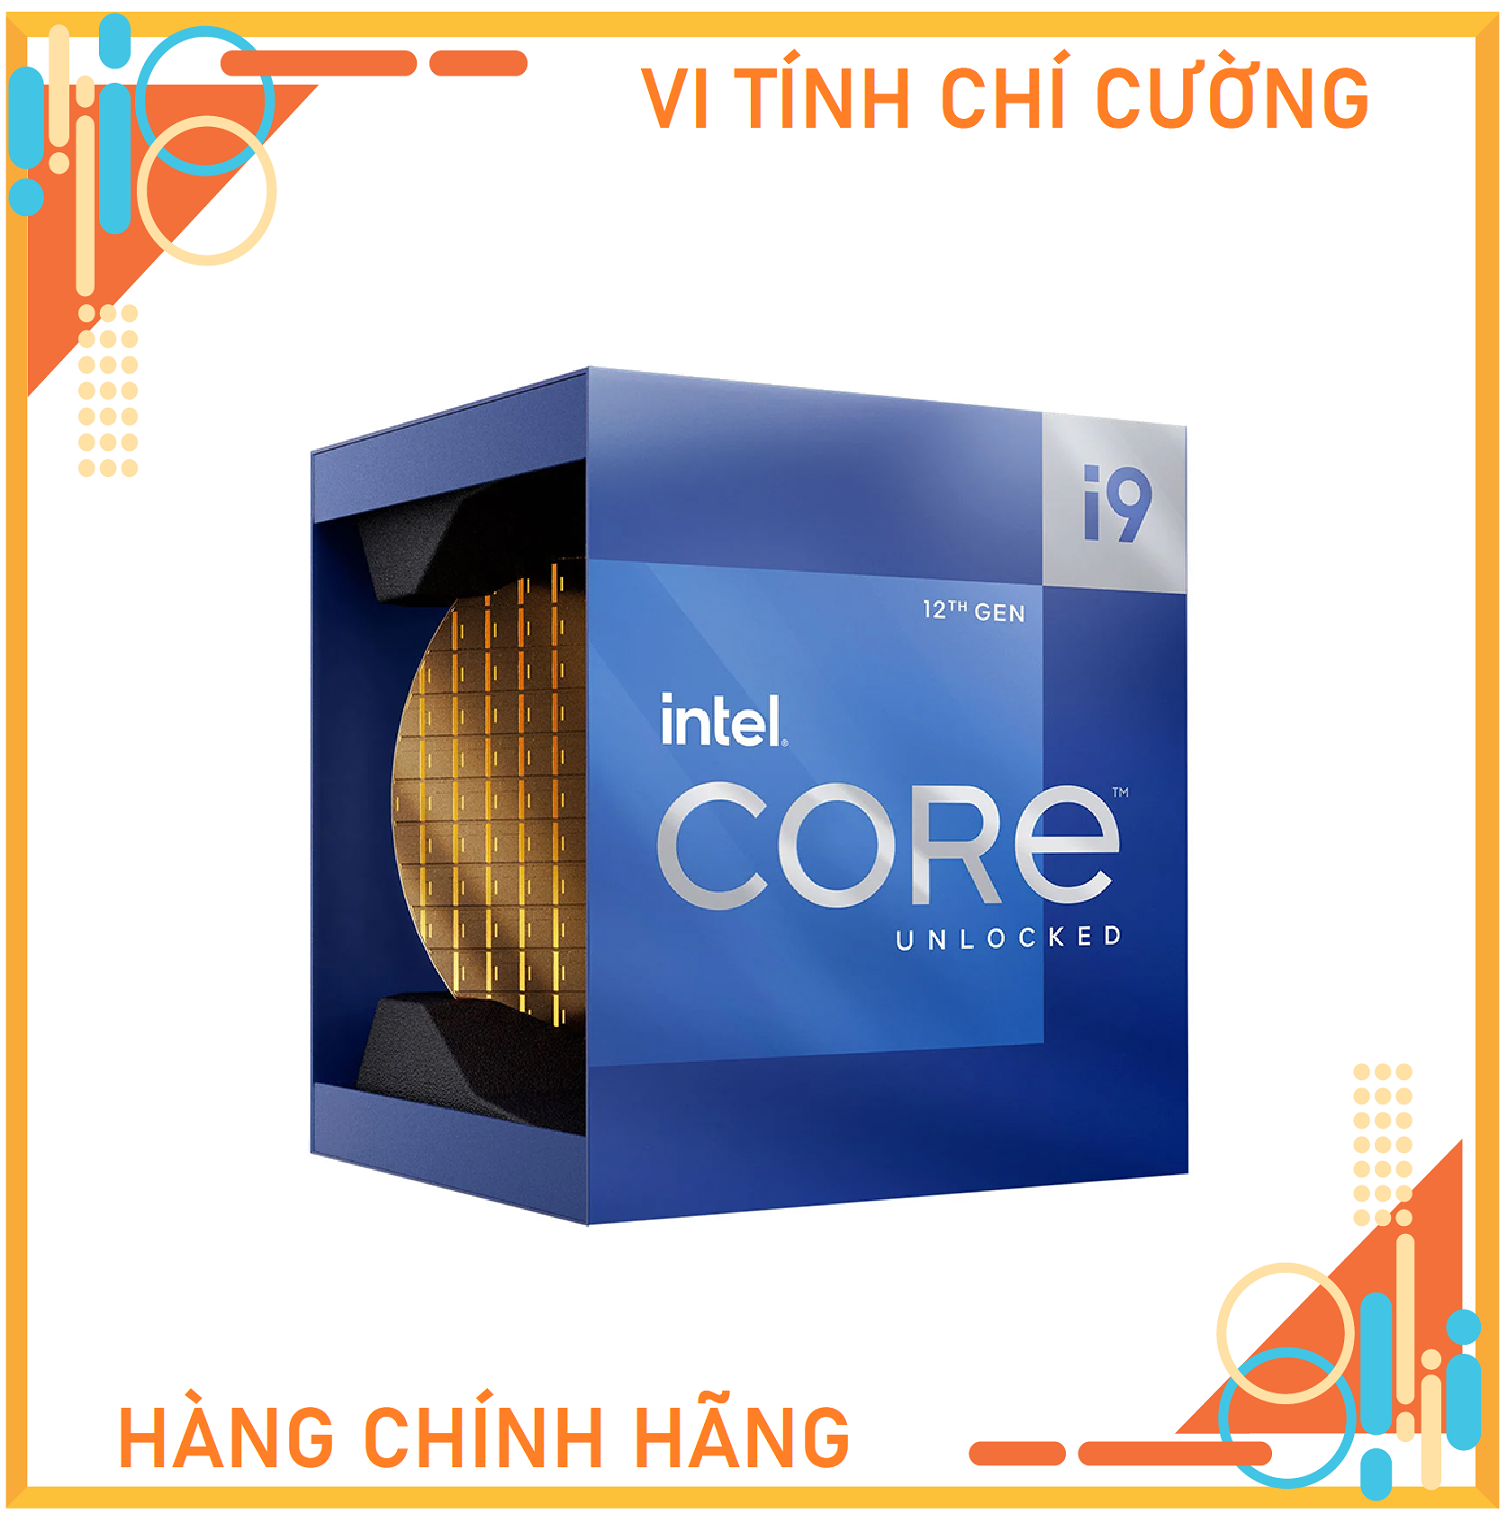 CPU Intel Core i9-12900K (30M Cache, up to 5.20 GHz, 16C24T, Socket 1700)